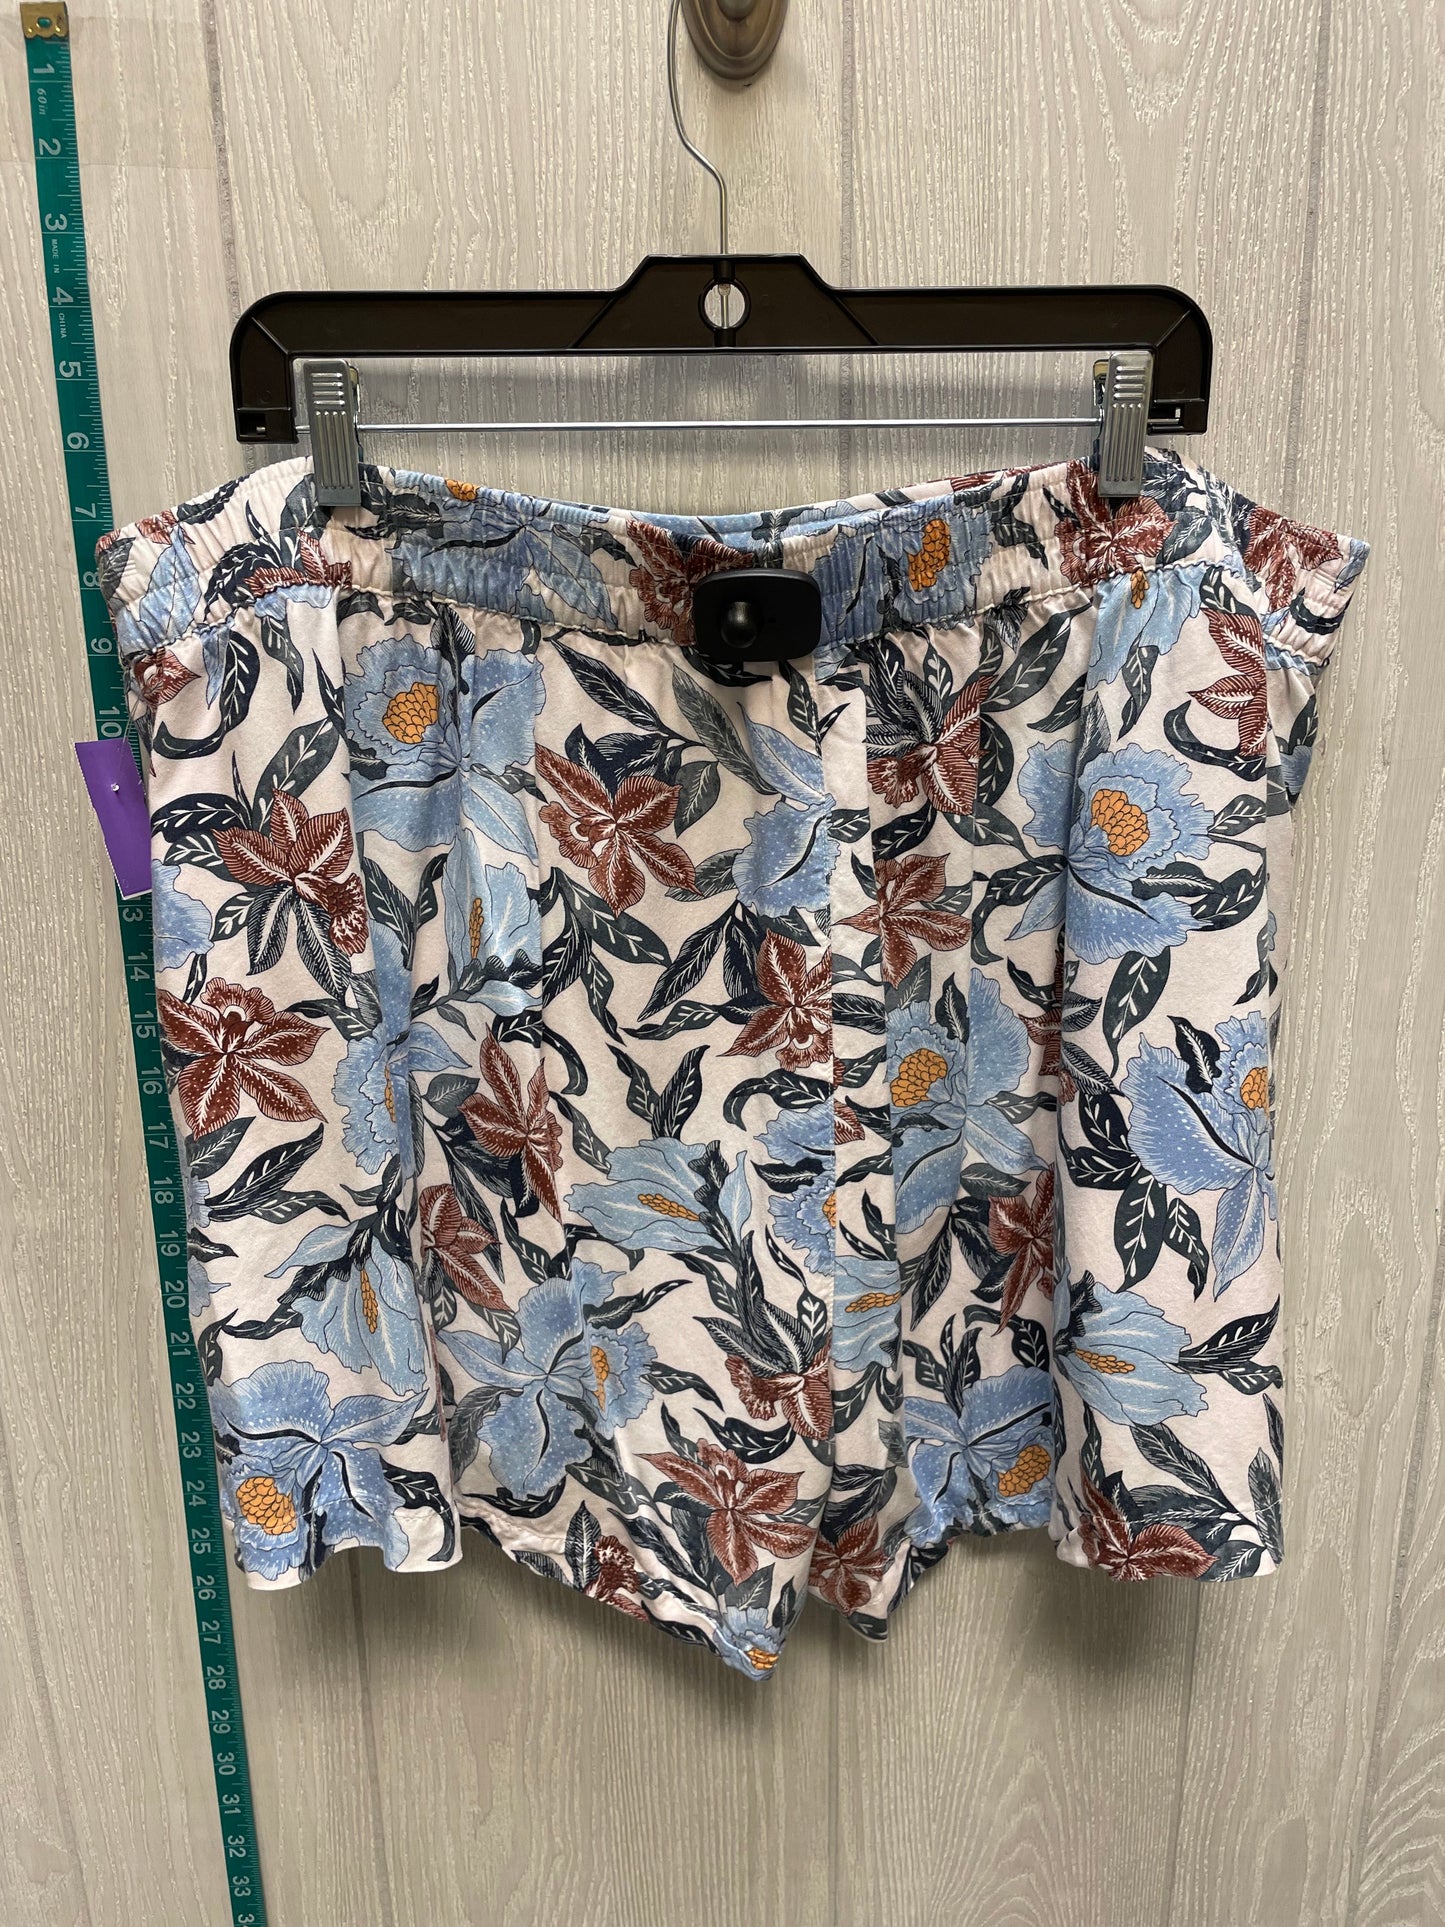 Floral Print Shorts Old Navy, Size 2x